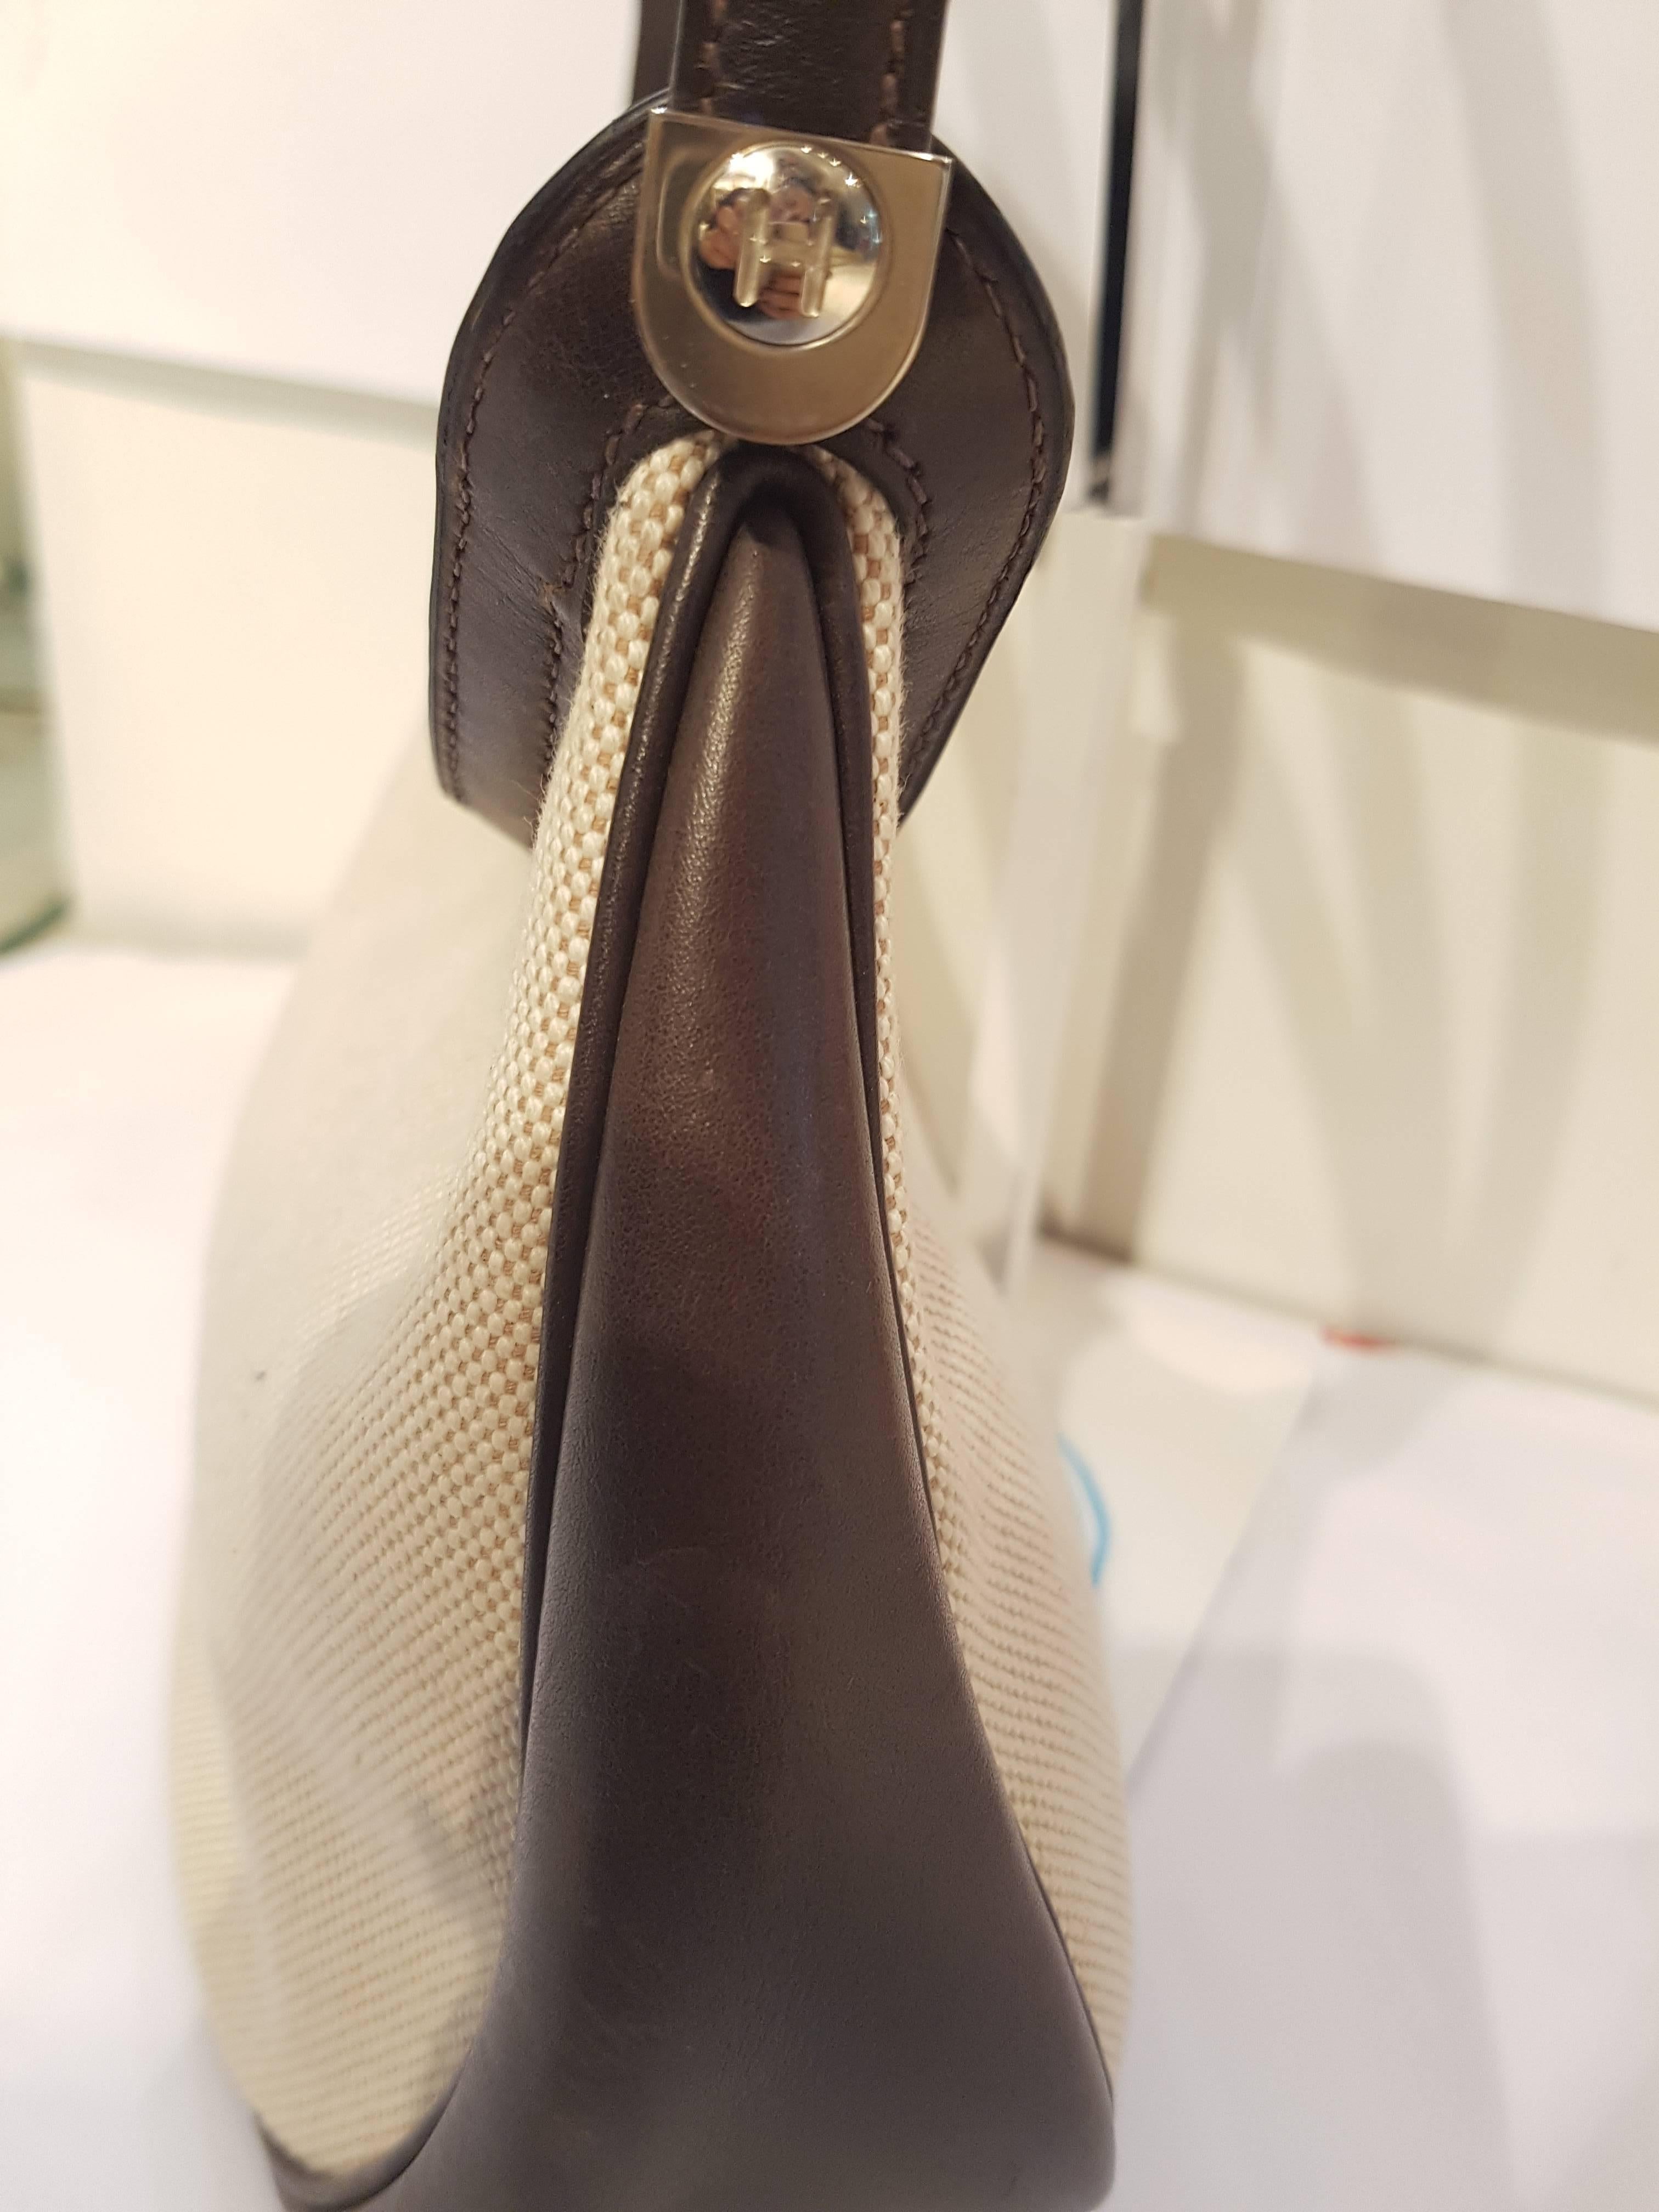 Herms Caporal brown leather cream textile shoulder bag
This stylish handbag shoulder bag is crafted of luxurious leather. The bag features a unique three tiered looping end to end shoulder strap with silver hardware. A top zipper opens to a leather